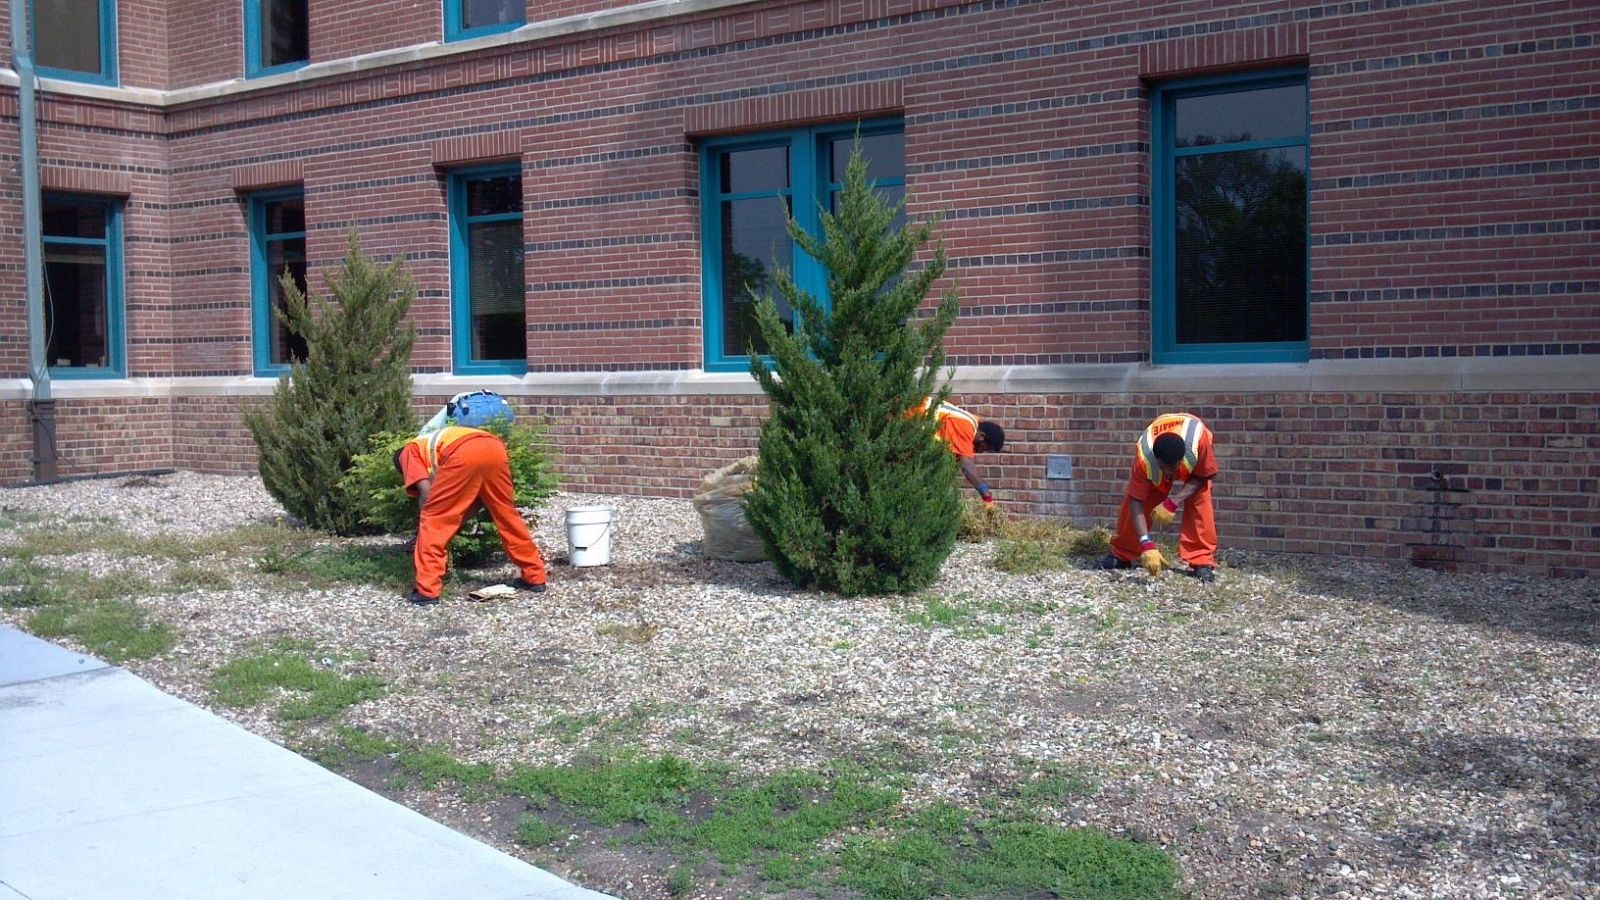 Inmates working outside to get weeds cleaned up on the courthouse landscaping